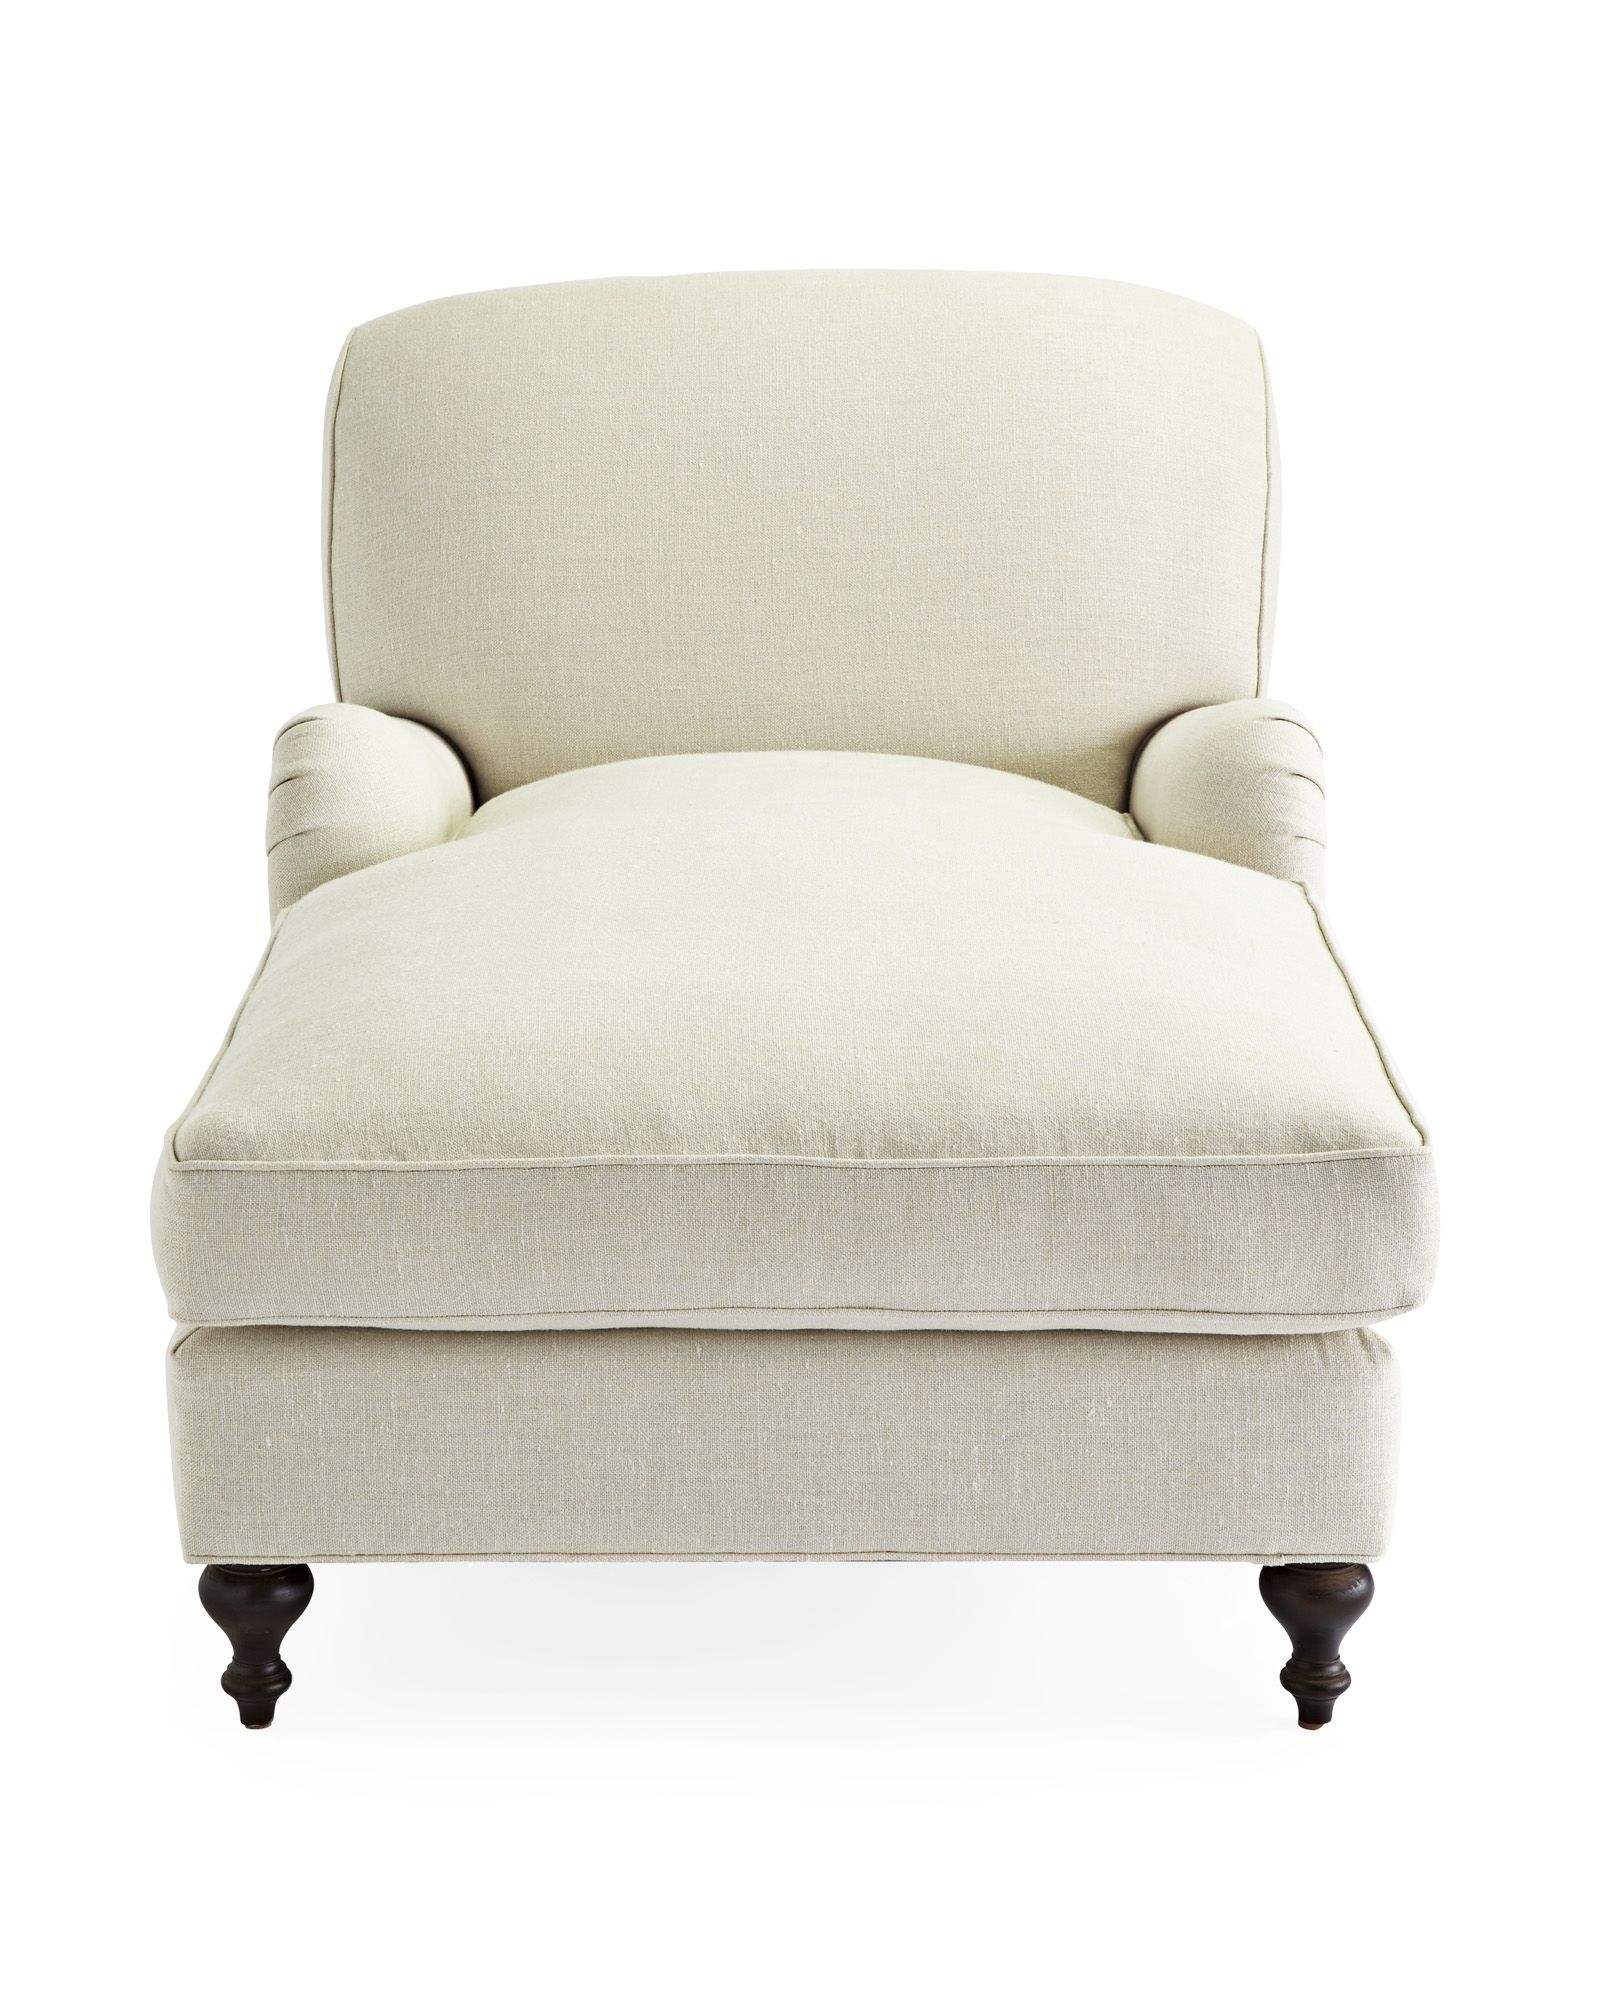 Most Up To Date Upholstered Chaises Inside Miramar Chaise – Serena & Lily (View 1 of 15)